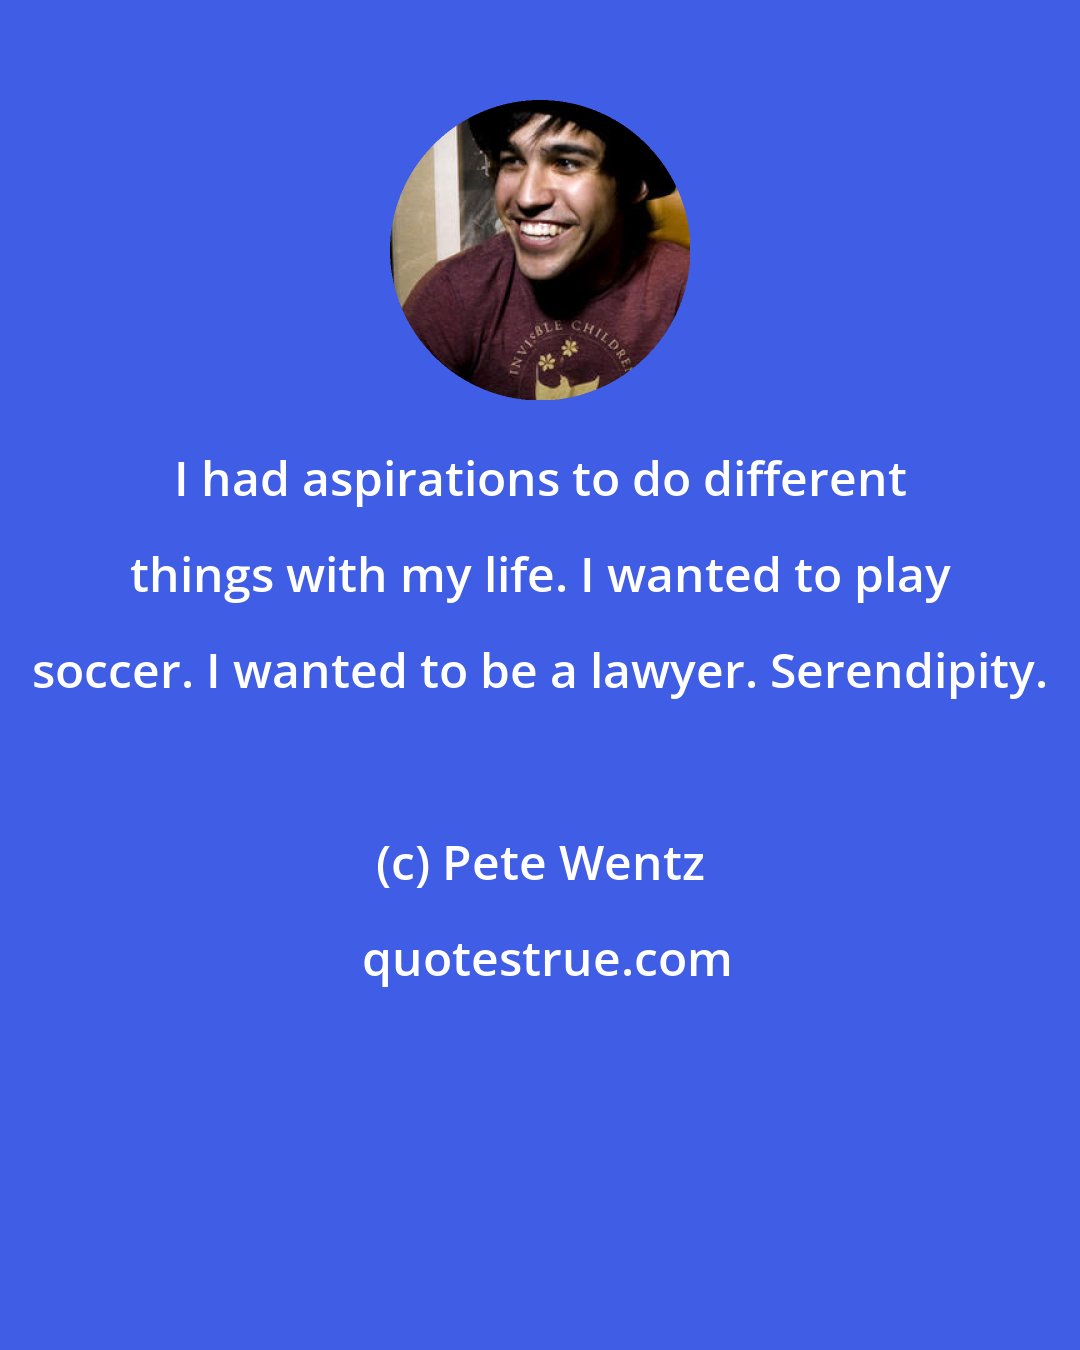 Pete Wentz: I had aspirations to do different things with my life. I wanted to play soccer. I wanted to be a lawyer. Serendipity.